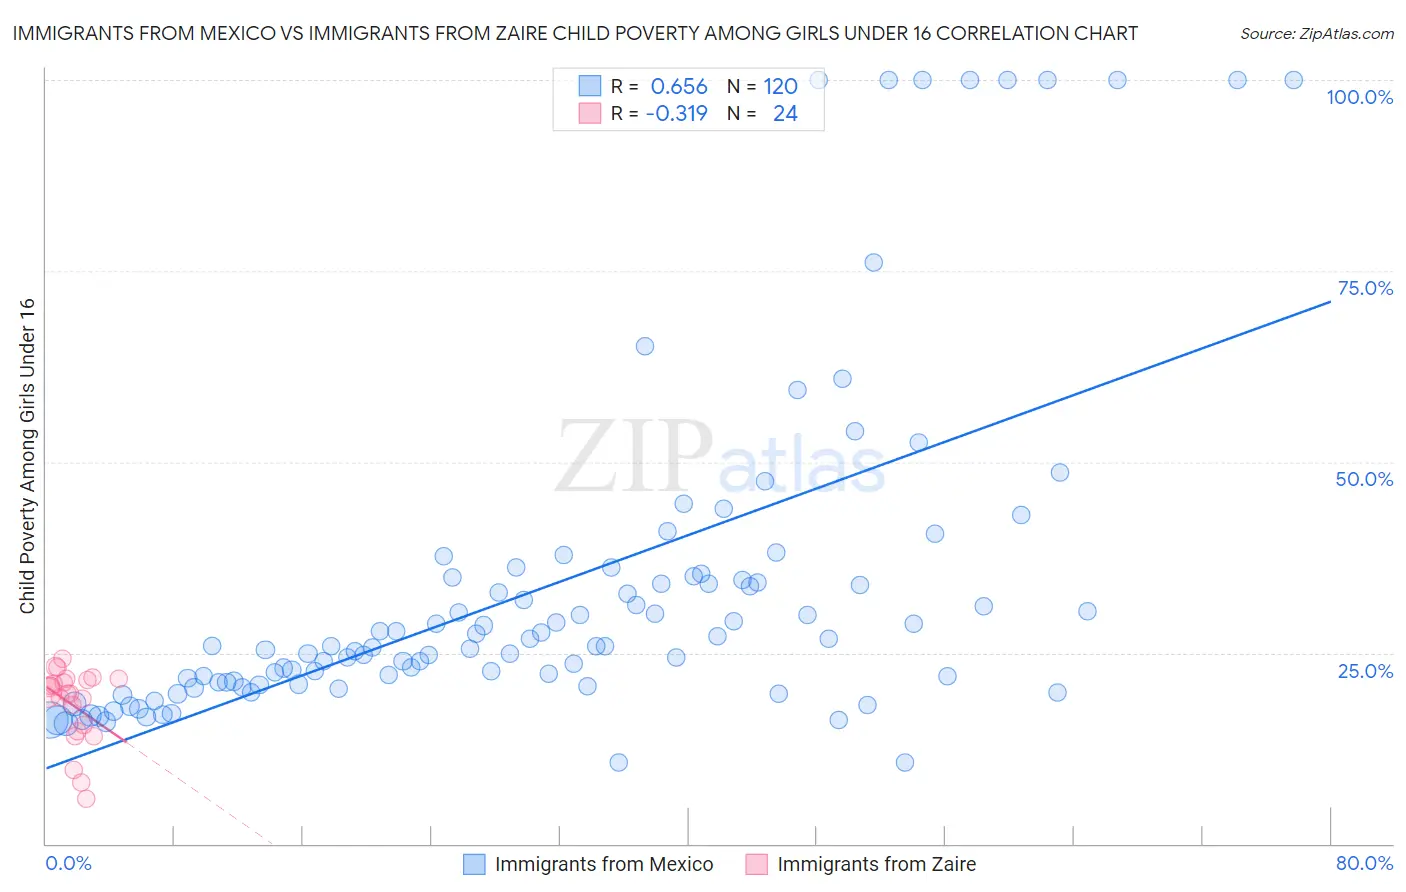 Immigrants from Mexico vs Immigrants from Zaire Child Poverty Among Girls Under 16